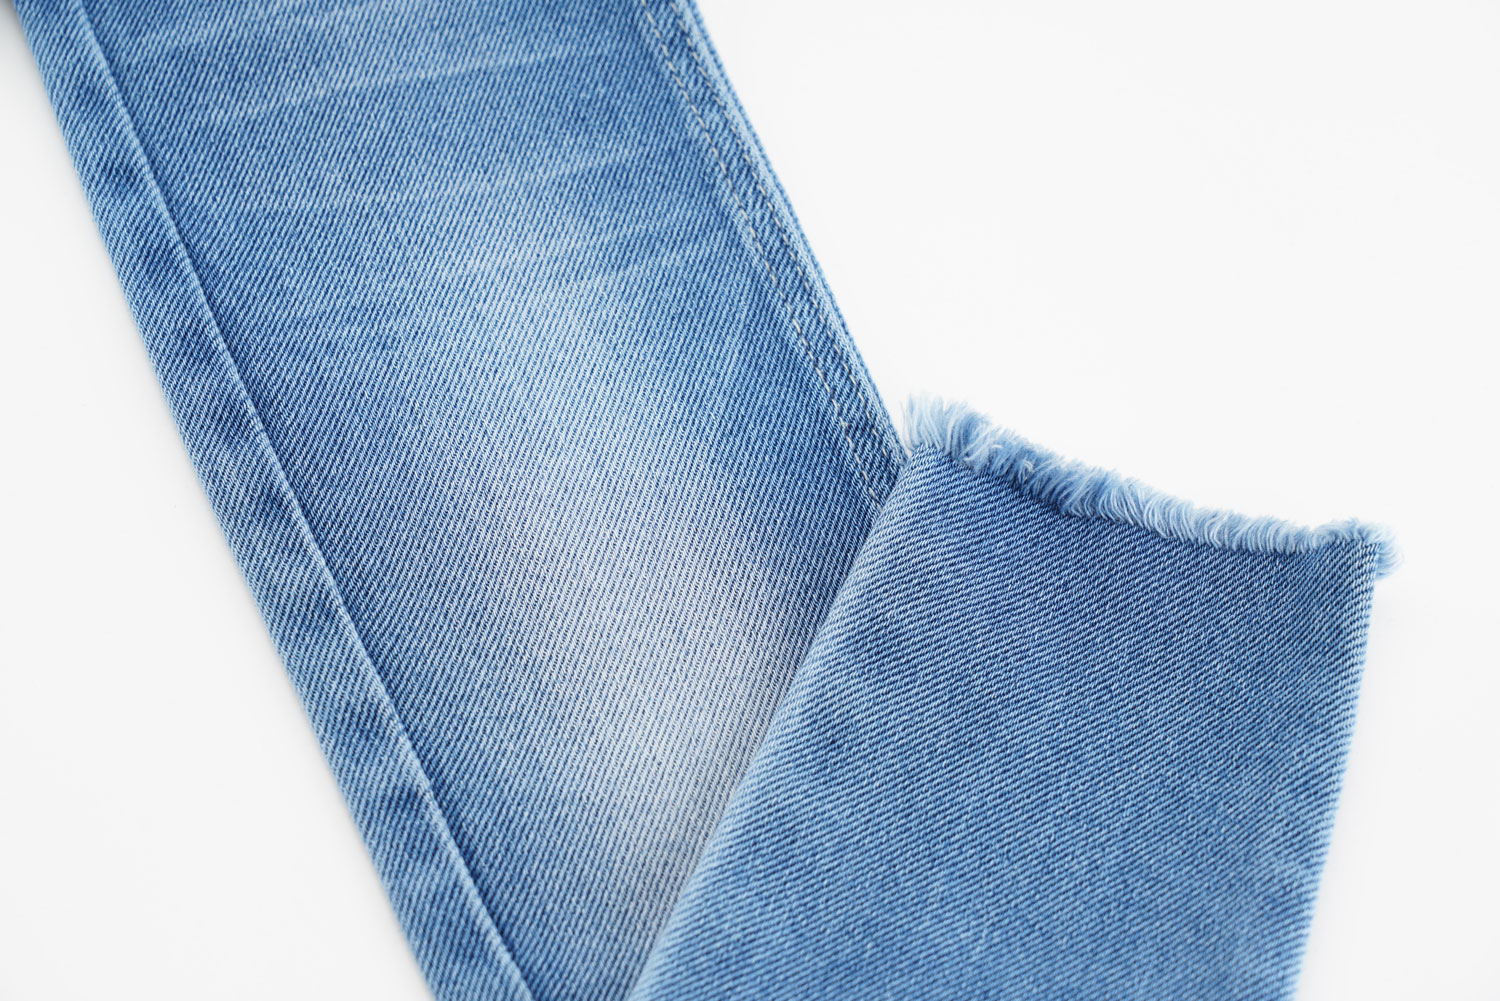 Why You Should Have a Comfort Stretch Denim? 2